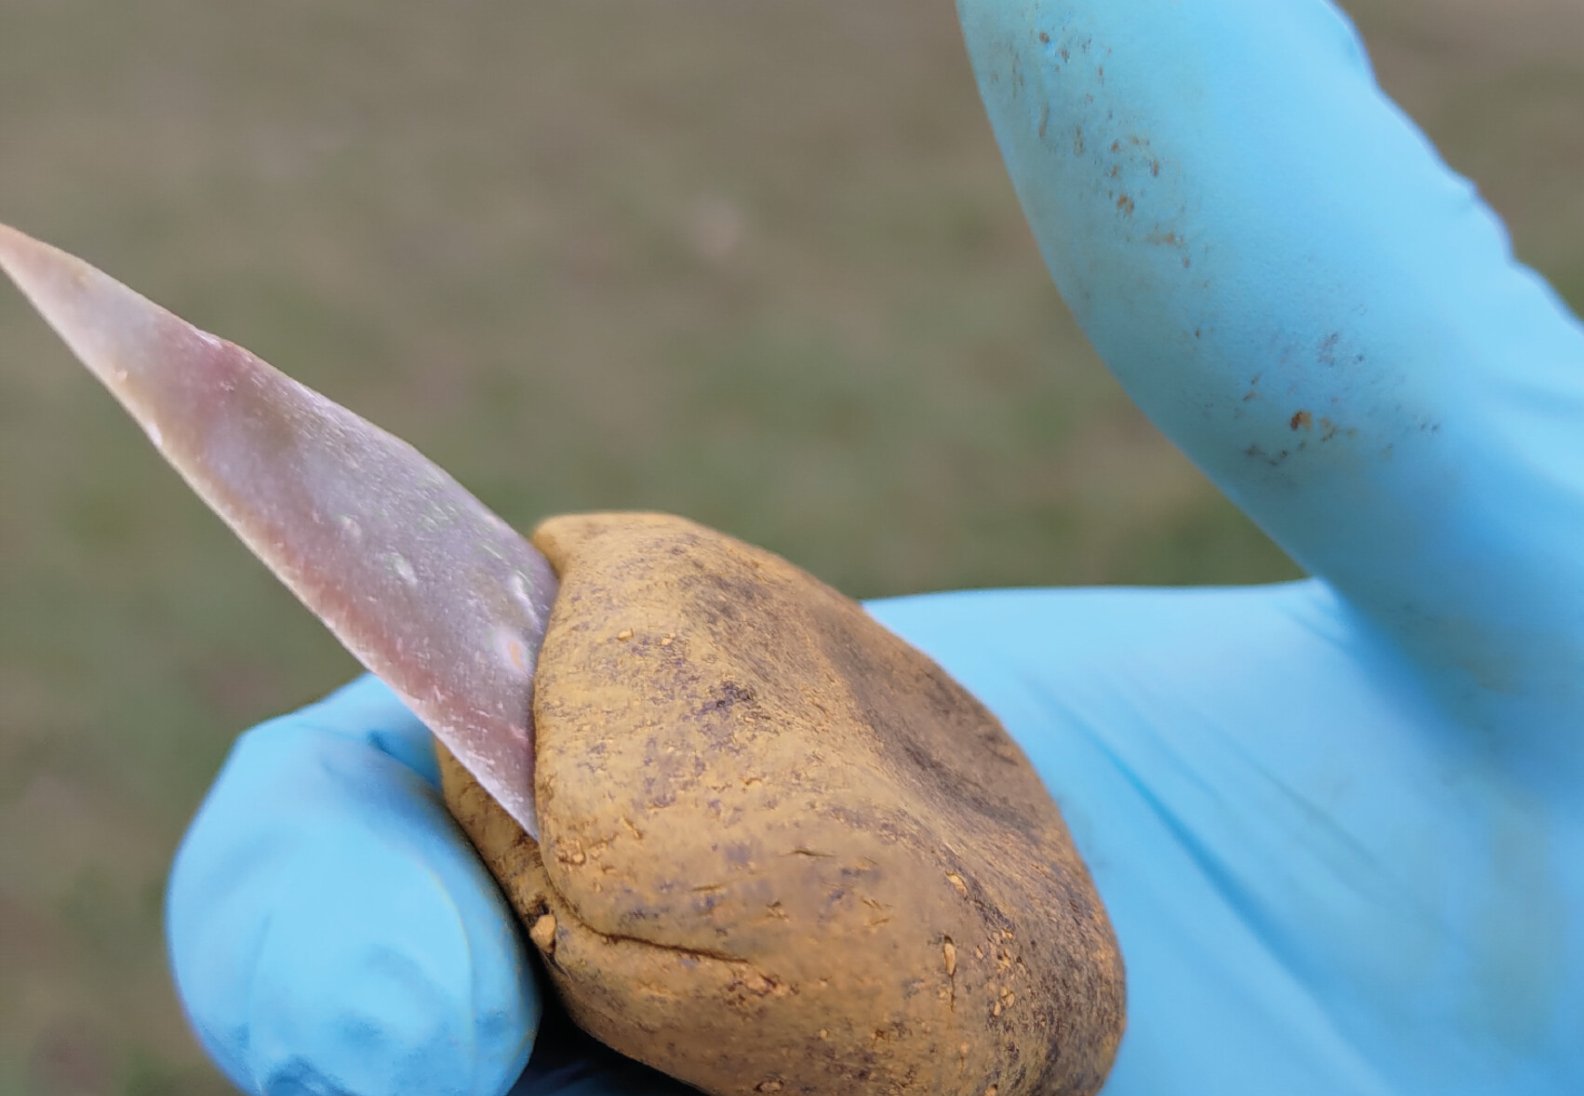 Experts reveal Neanderthals used glue to make stone tools